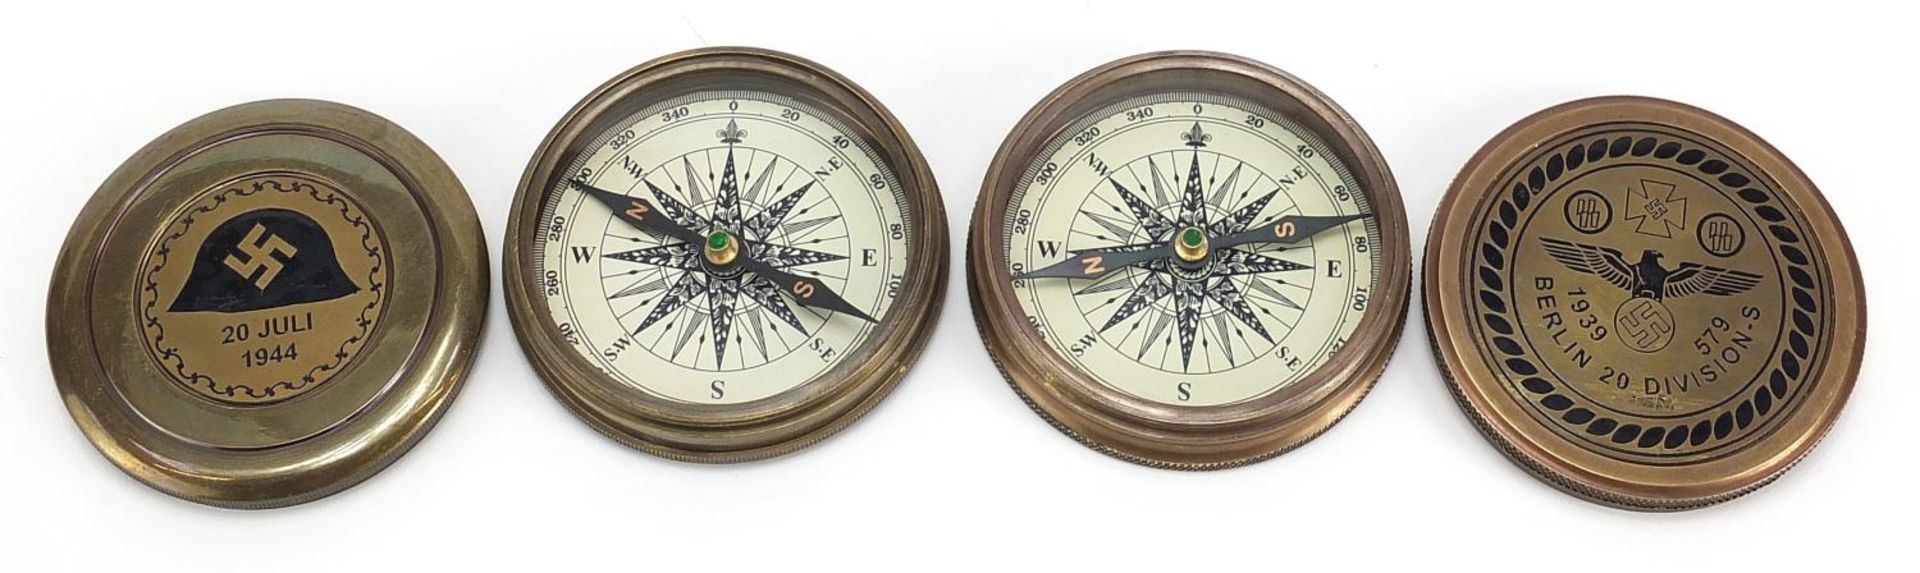 Two German military interest brass compasses, each 7.5cm in diameter